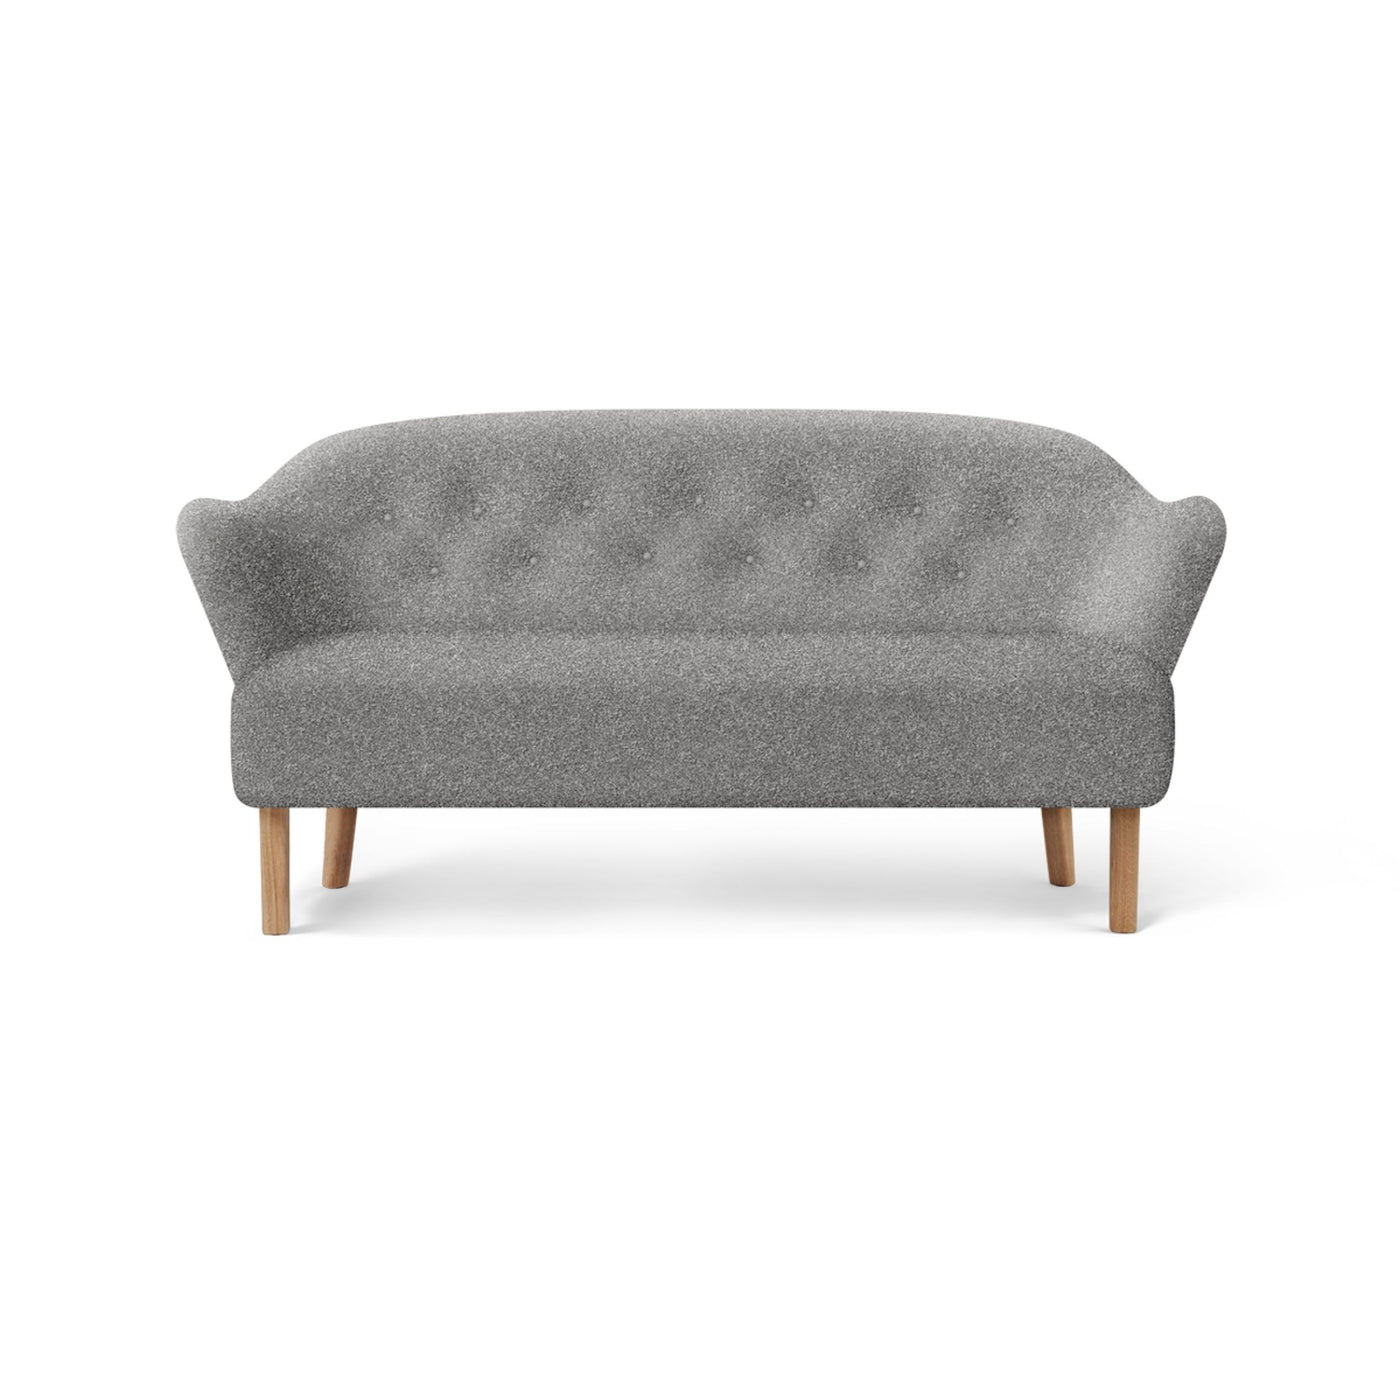 By Lassen Ingeborg sofa with natural oak legs. Made to order from someday designs. #colour_sahco-zero-12